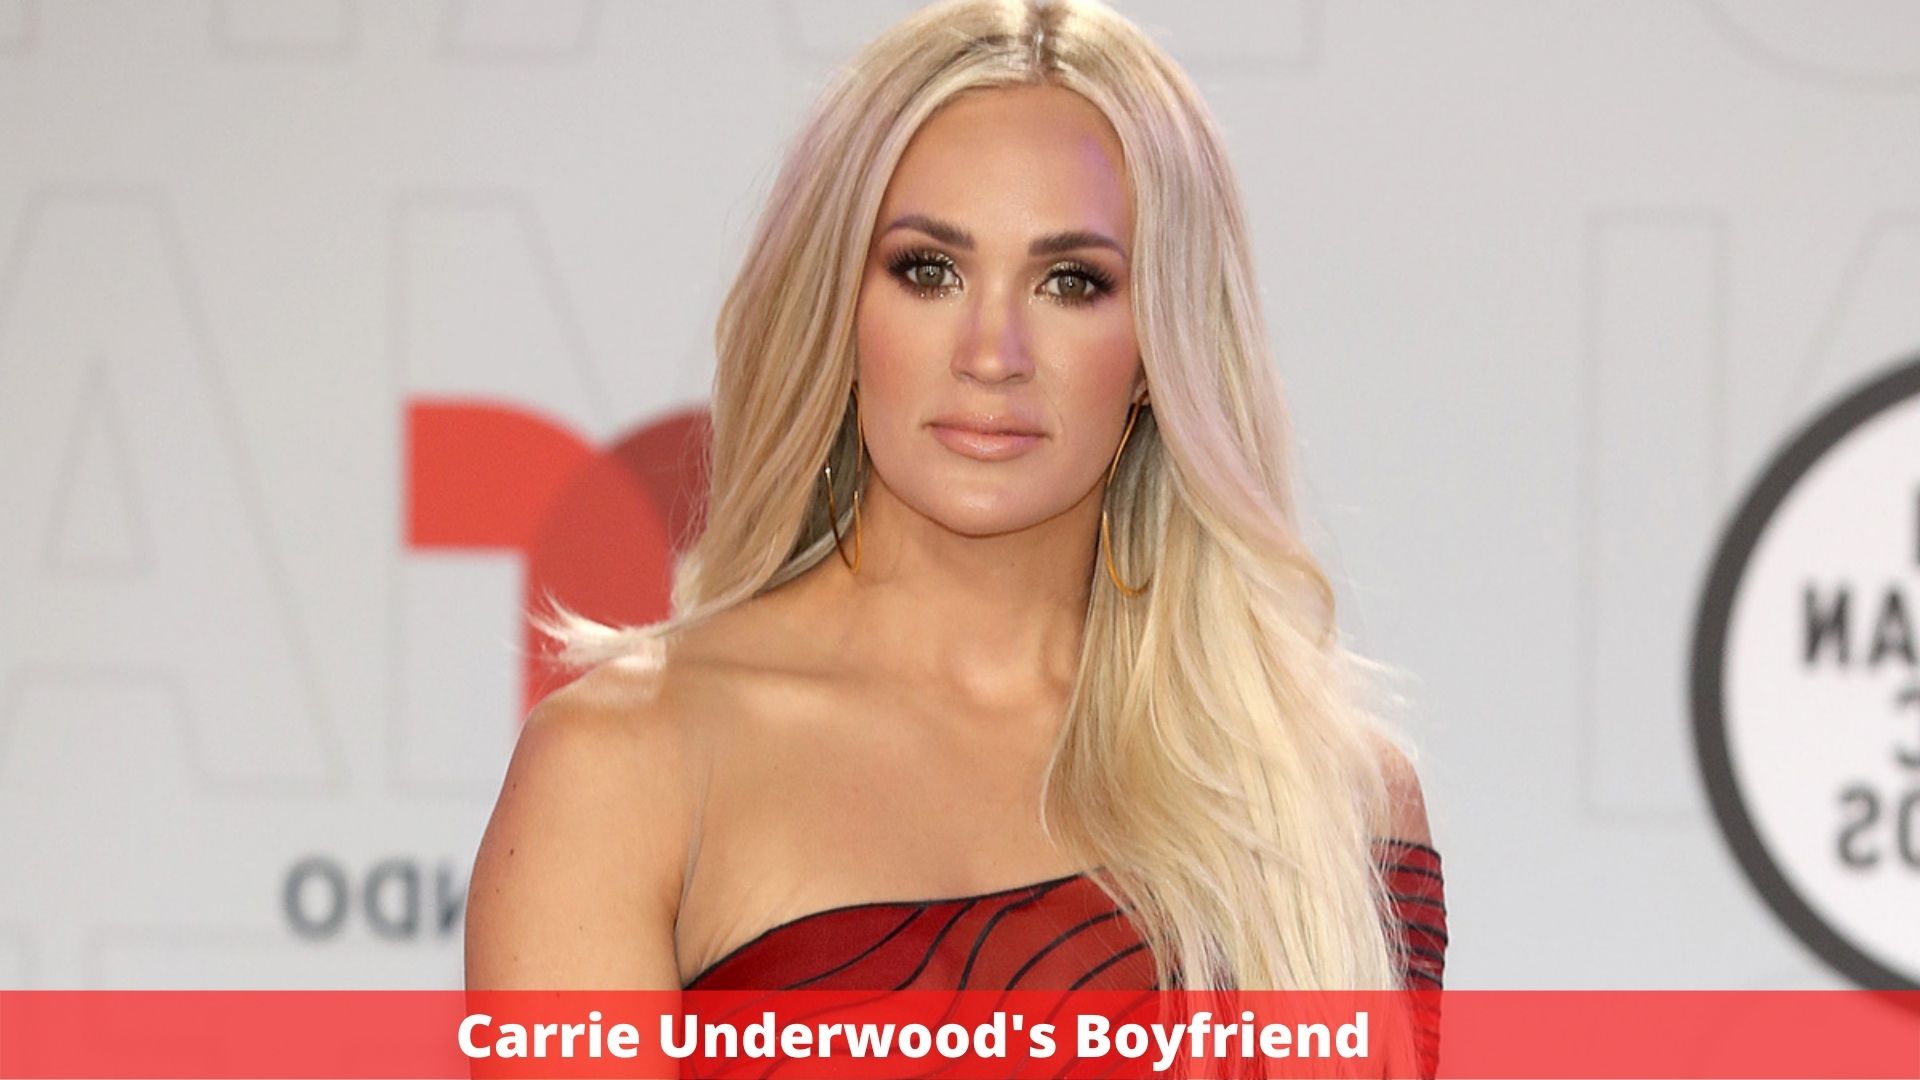 Carrie Underwood's Boyfriend - A Complete Timeline of Carrie Underwood and Mike Fisher's Relationship